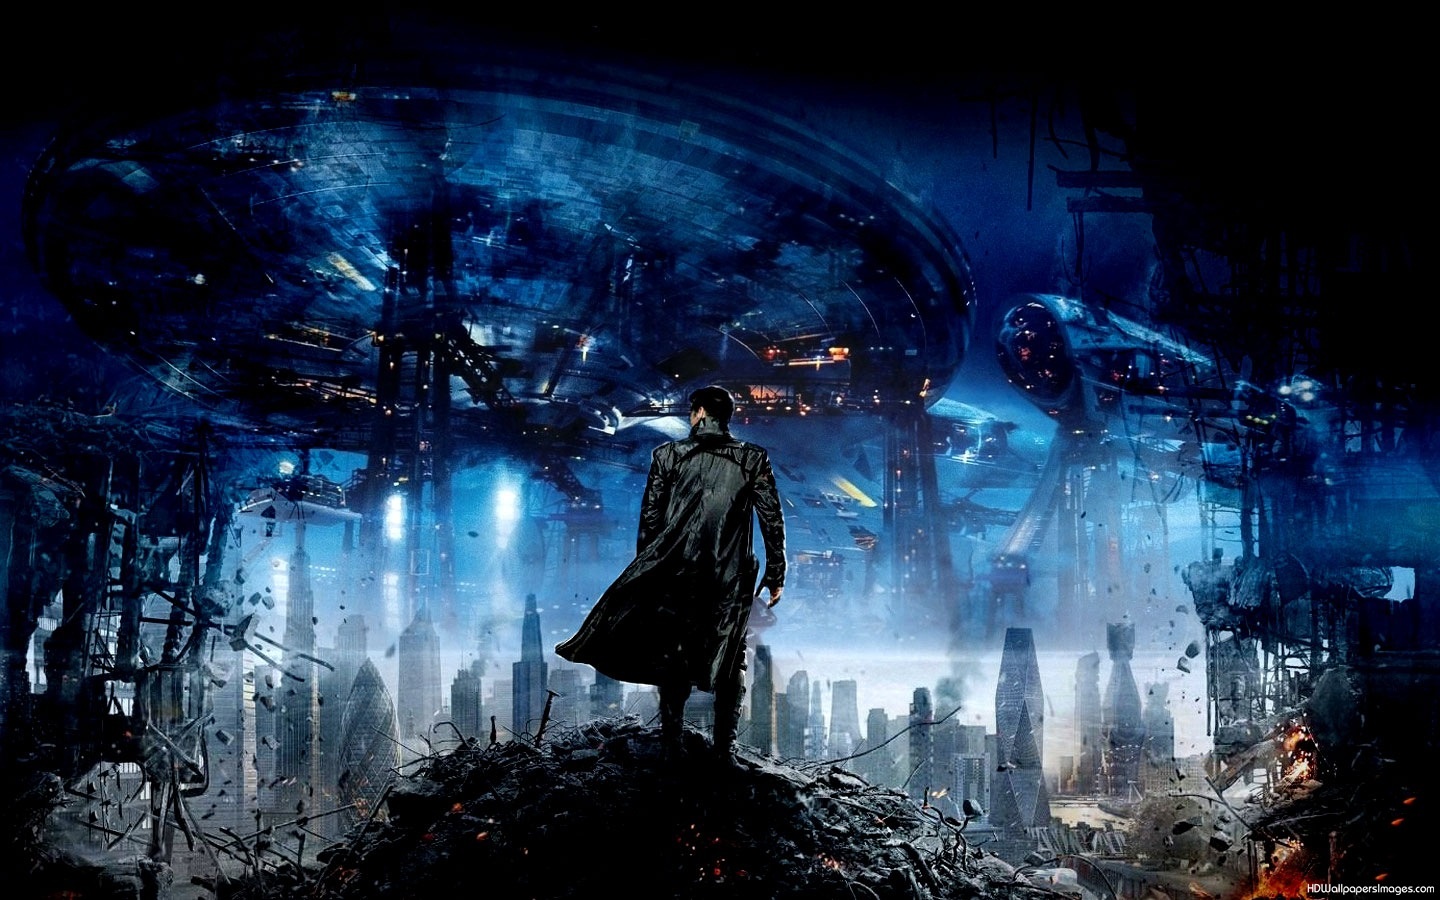 Star Trek: Into Darkness Blu-ray Steelbook prepares its launch in the USA as Walmart exclusive